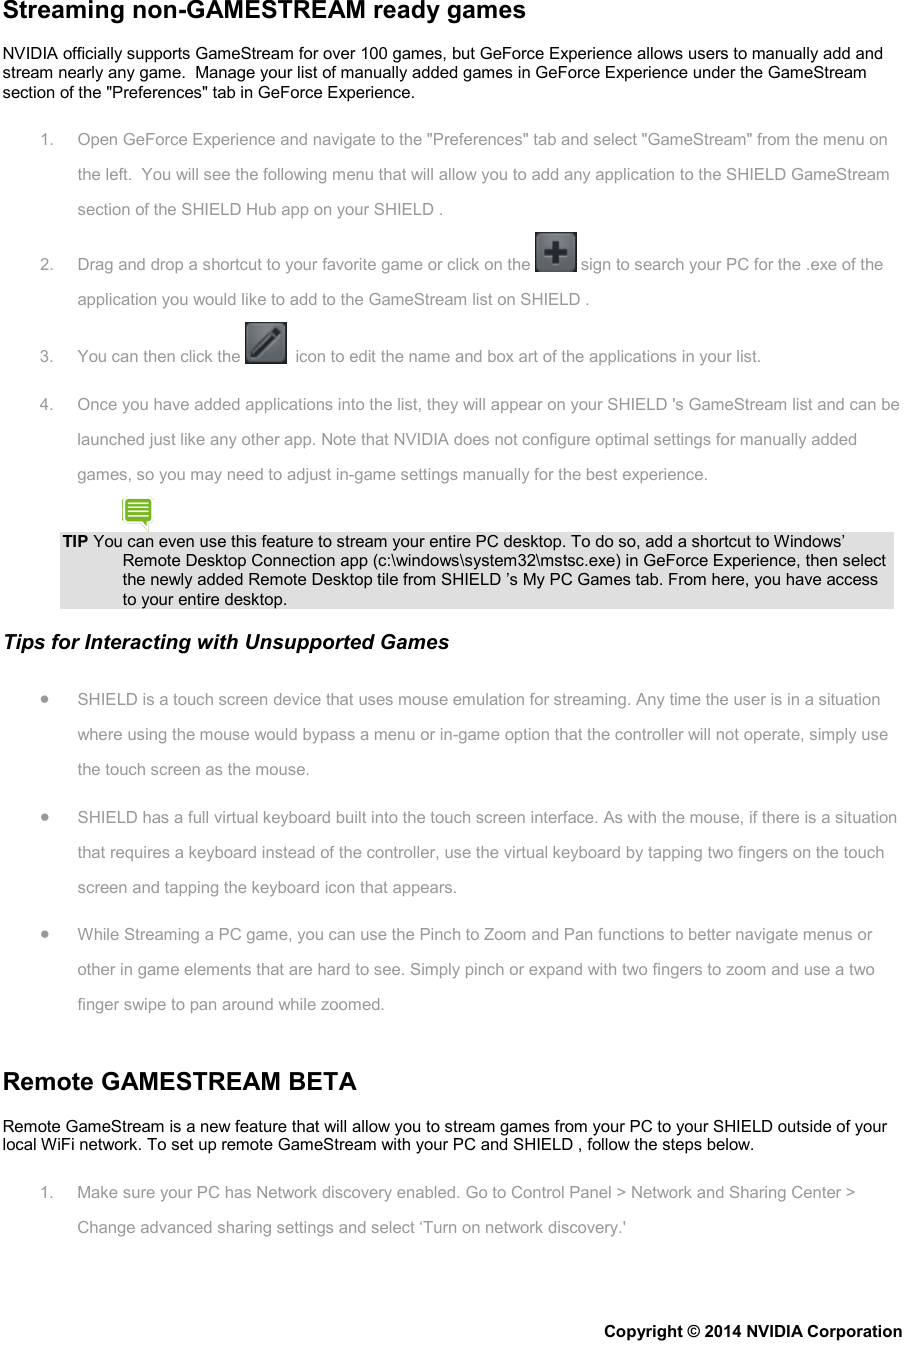 Streaming non-GAMESTREAM ready games NVIDIA officially supports GameStream for over 100 games, but GeForce Experience allows users to manually add and stream nearly any game.  Manage your list of manually added games in GeForce Experience under the GameStream section of the &quot;Preferences&quot; tab in GeForce Experience. 1. Open GeForce Experience and navigate to the &quot;Preferences&quot; tab and select &quot;GameStream&quot; from the menu on the left.  You will see the following menu that will allow you to add any application to the SHIELD GameStream section of the SHIELD Hub app on your SHIELD . 2. Drag and drop a shortcut to your favorite game or click on the   sign to search your PC for the .exe of the application you would like to add to the GameStream list on SHIELD . 3. You can then click the    icon to edit the name and box art of the applications in your list. 4.  Once you have added applications into the list, they will appear on your SHIELD &apos;s GameStream list and can be launched just like any other app. Note that NVIDIA does not configure optimal settings for manually added games, so you may need to adjust in-game settings manually for the best experience. TIP You can even use this feature to stream your entire PC desktop. To do so, add a shortcut to Windows’ Remote Desktop Connection app (c:\windows\system32\mstsc.exe) in GeForce Experience, then select the newly added Remote Desktop tile from SHIELD ’s My PC Games tab. From here, you have access to your entire desktop. Tips for Interacting with Unsupported Games • SHIELD is a touch screen device that uses mouse emulation for streaming. Any time the user is in a situation where using the mouse would bypass a menu or in-game option that the controller will not operate, simply use the touch screen as the mouse. • SHIELD has a full virtual keyboard built into the touch screen interface. As with the mouse, if there is a situation that requires a keyboard instead of the controller, use the virtual keyboard by tapping two fingers on the touch screen and tapping the keyboard icon that appears. • While Streaming a PC game, you can use the Pinch to Zoom and Pan functions to better navigate menus or other in game elements that are hard to see. Simply pinch or expand with two fingers to zoom and use a two finger swipe to pan around while zoomed.   Remote GAMESTREAM BETA Remote GameStream is a new feature that will allow you to stream games from your PC to your SHIELD outside of your local WiFi network. To set up remote GameStream with your PC and SHIELD , follow the steps below. 1. Make sure your PC has Network discovery enabled. Go to Control Panel &gt; Network and Sharing Center &gt; Change advanced sharing settings and select ‘Turn on network discovery.&apos; Copyright © 2014 NVIDIA Corporation   